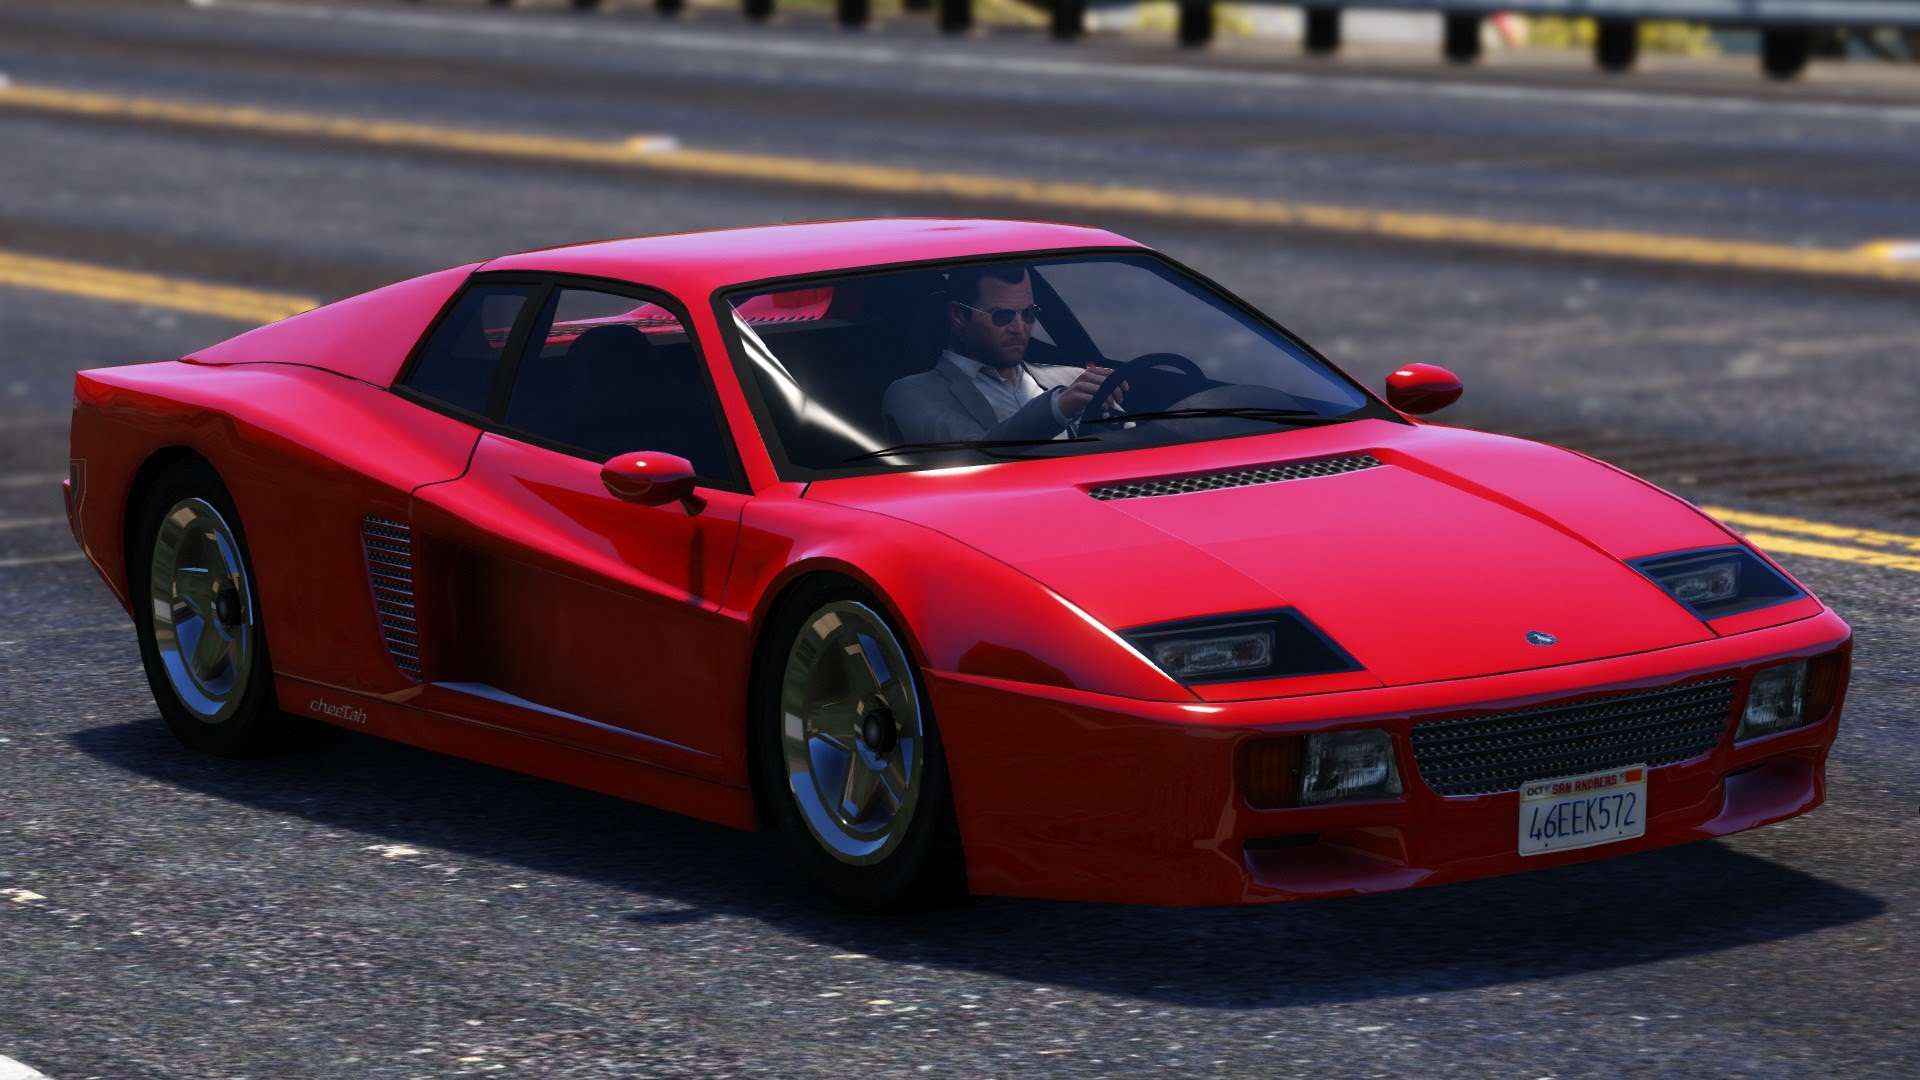 New GTA Online Update: New Car, Discounts, and More